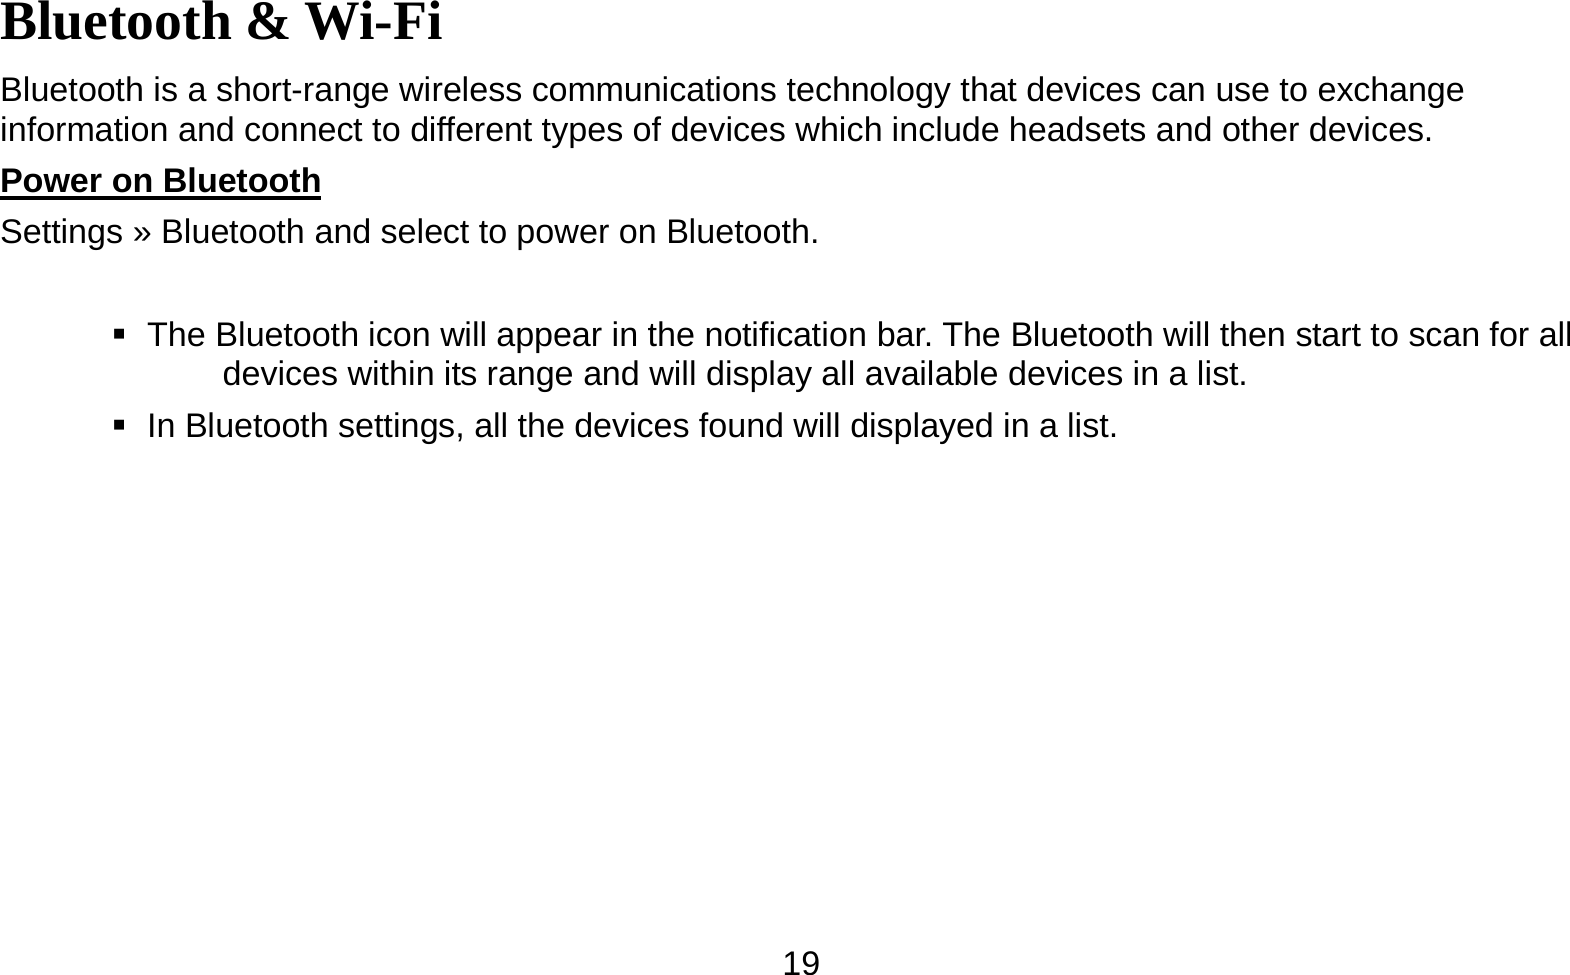   19Bluetooth &amp; Wi-Fi Bluetooth is a short-range wireless communications technology that devices can use to exchange information and connect to different types of devices which include headsets and other devices. Power on Bluetooth                                                                                Settings » Bluetooth and select to power on Bluetooth.     The Bluetooth icon will appear in the notification bar. The Bluetooth will then start to scan for all devices within its range and will display all available devices in a list.    In Bluetooth settings, all the devices found will displayed in a list.  